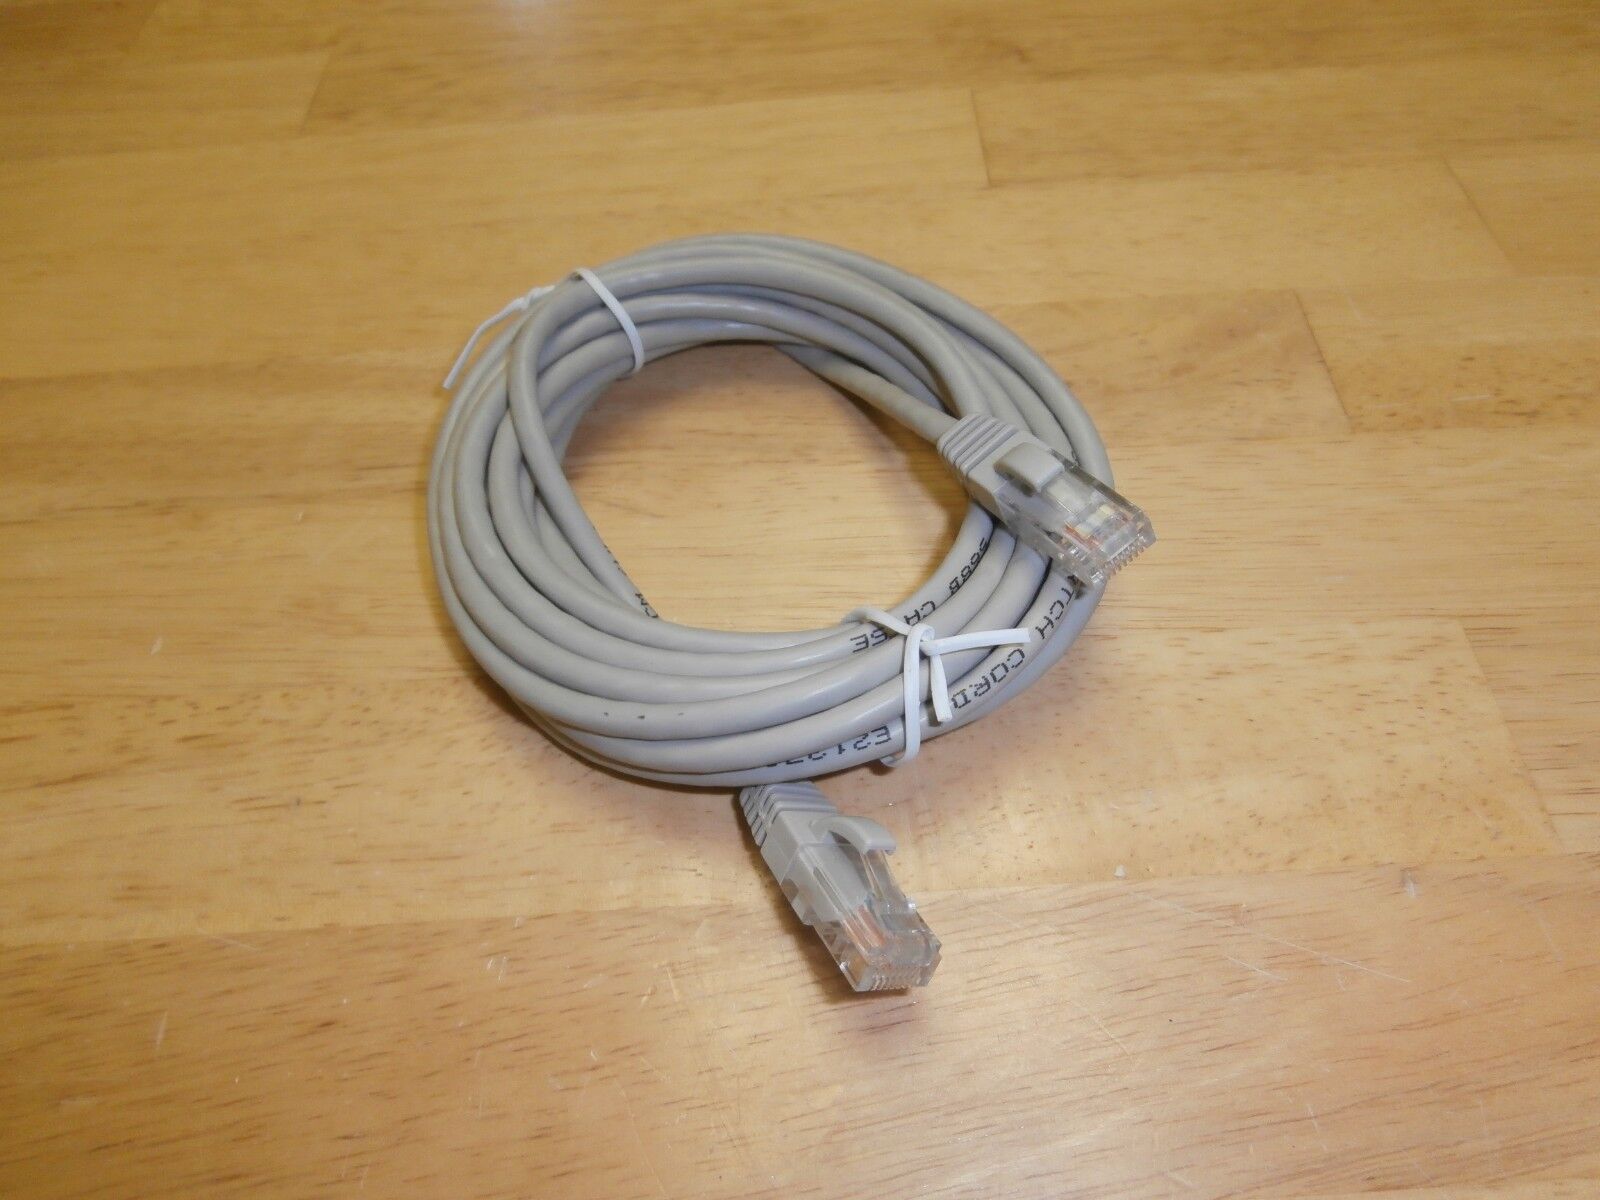 14FT CAT5E LAN Ethernet Network Patch Cable,350Mhz,Grey, 4Pair,Snagless,UTP,NOS